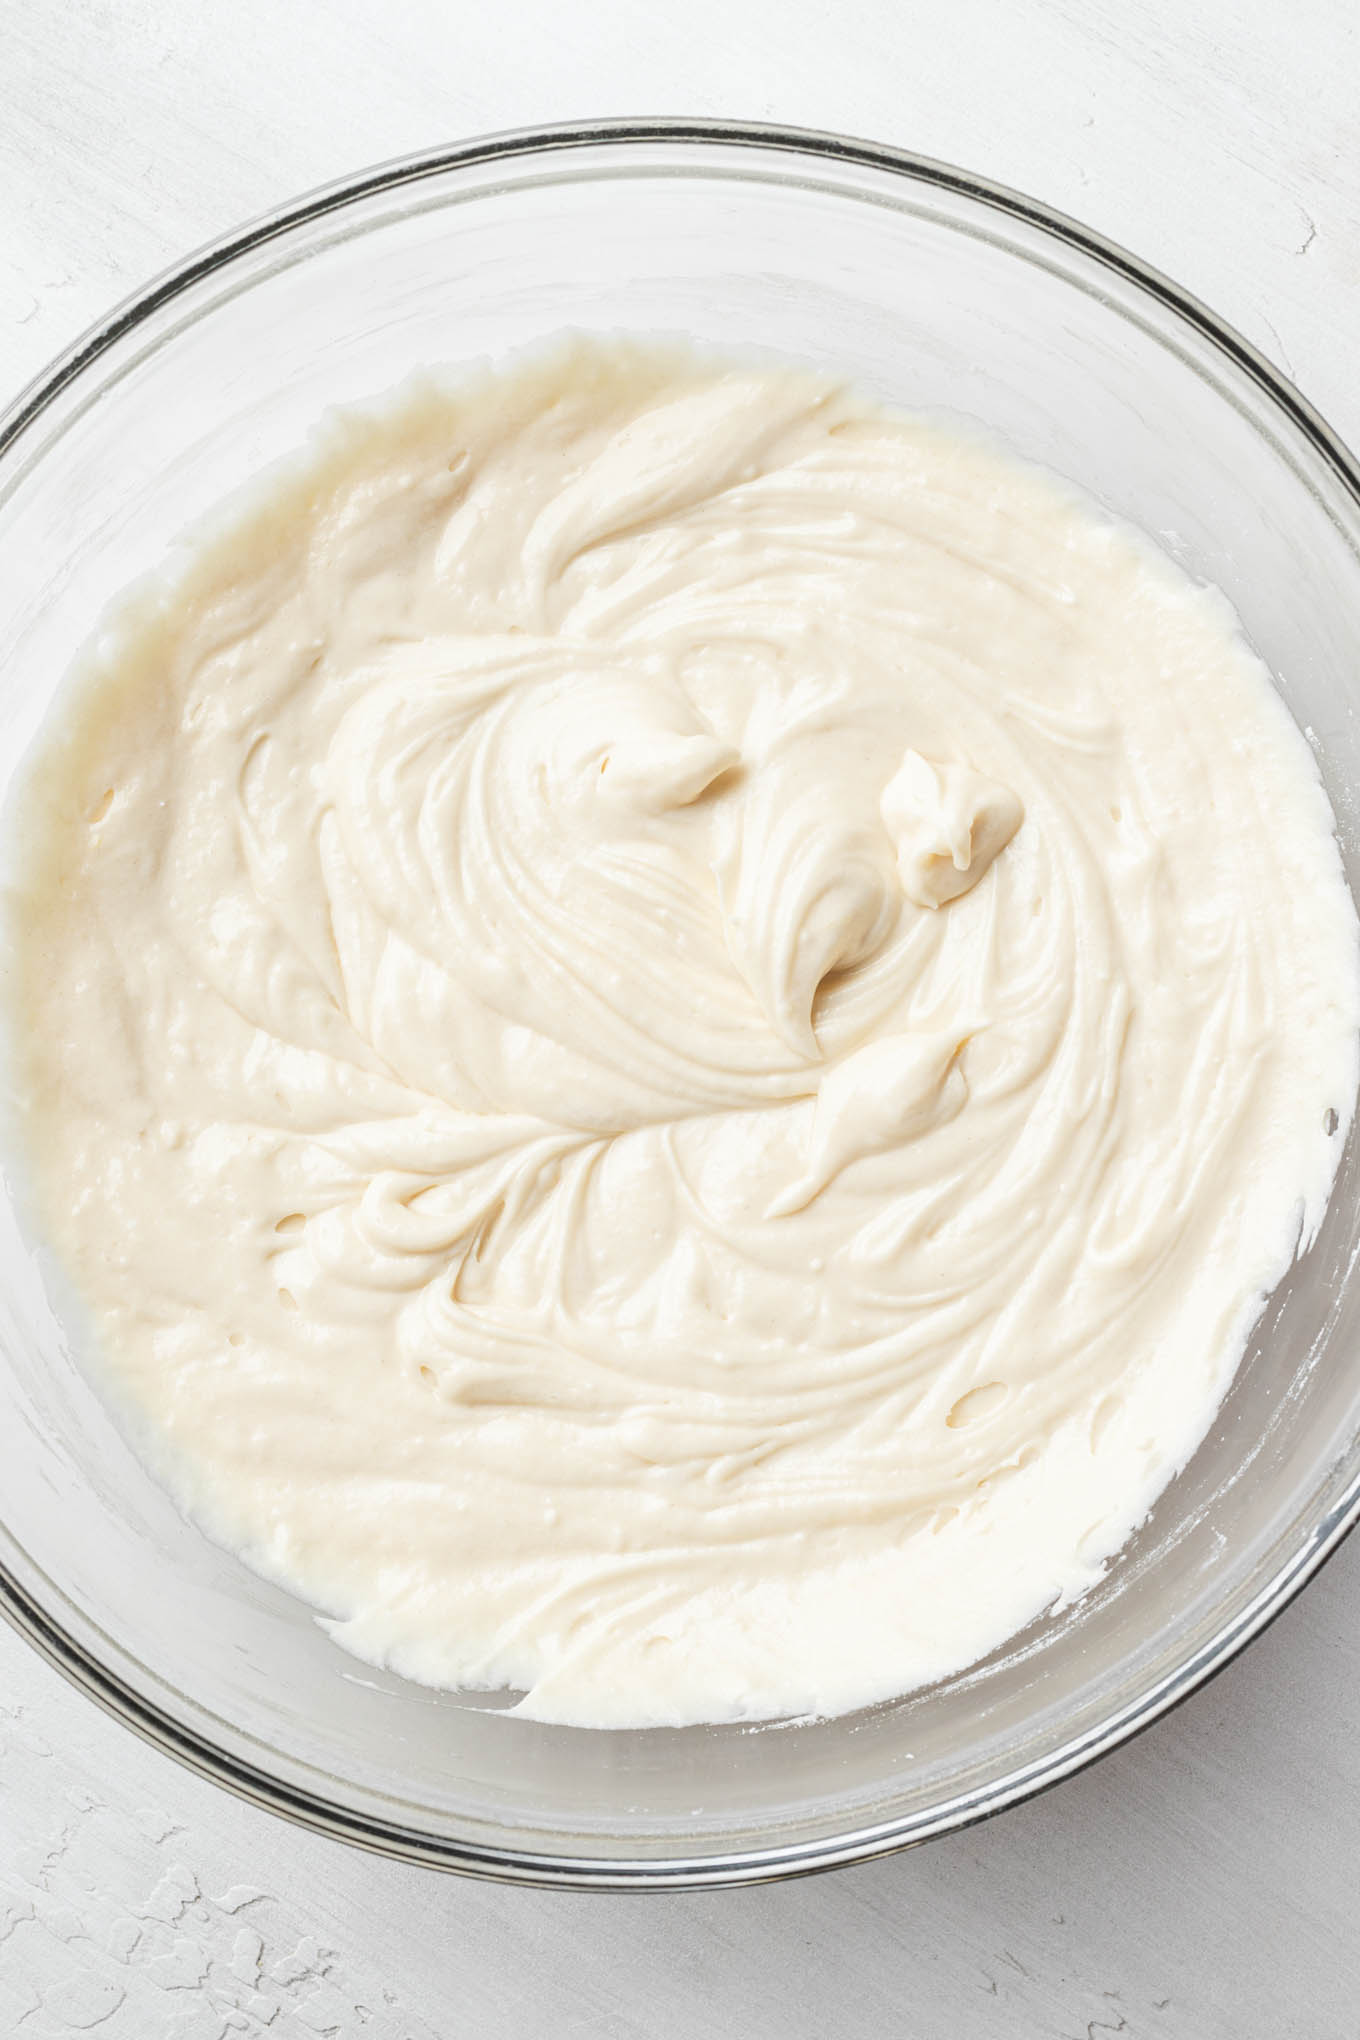 An overhead view of vanilla cake batter in a glass mixing bowl.